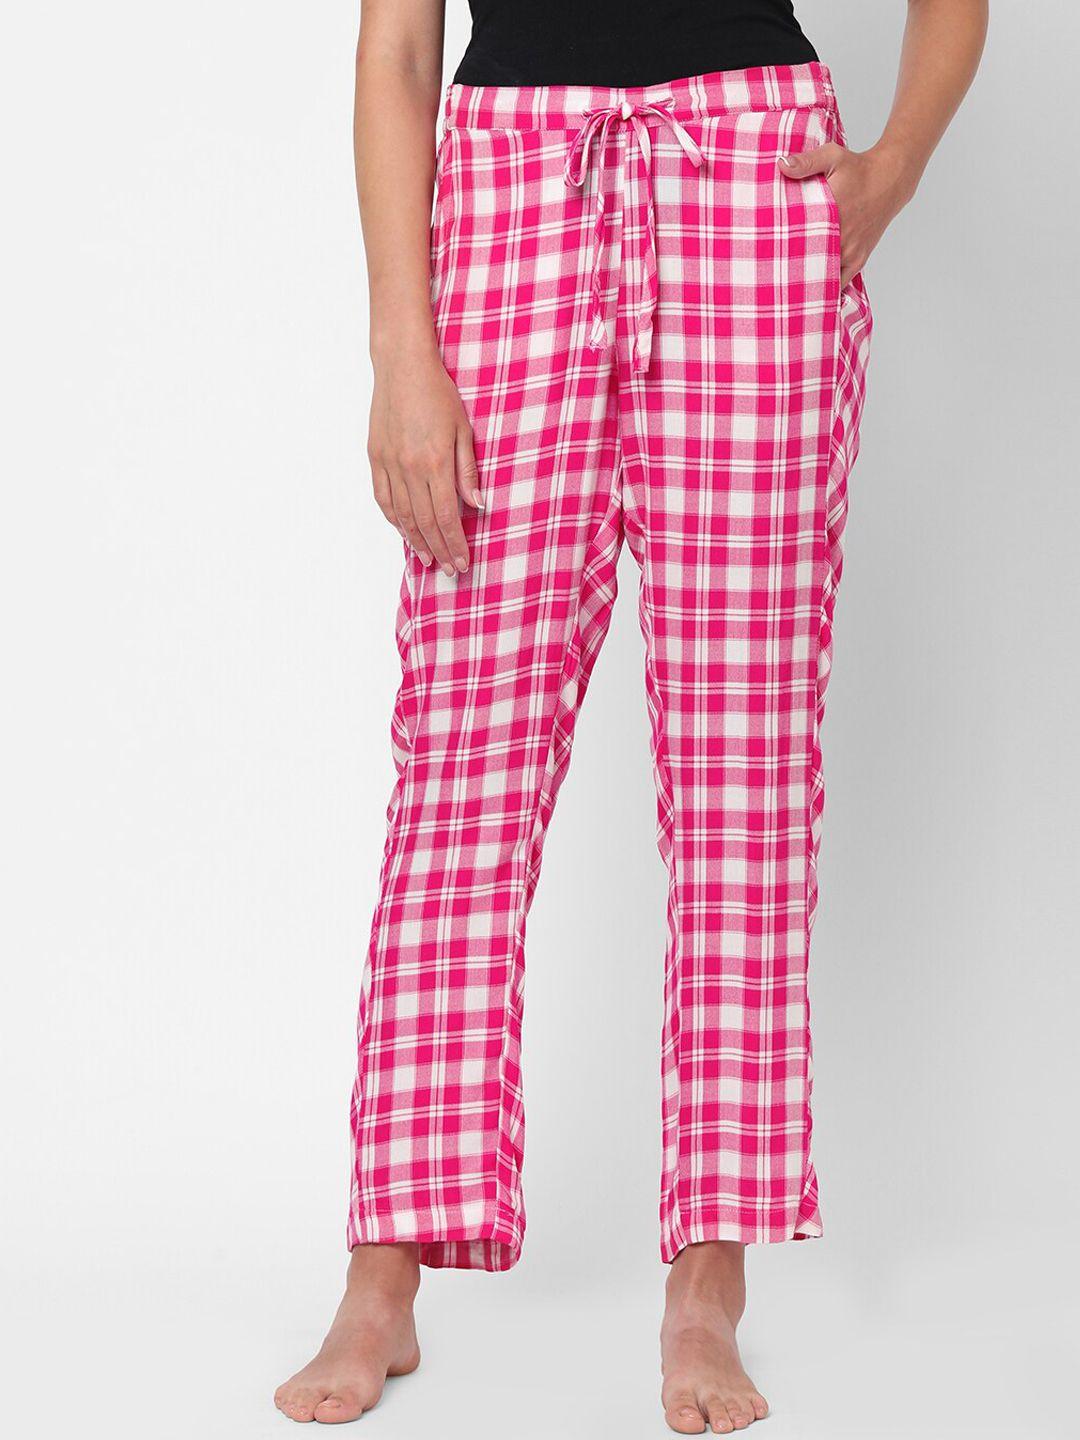 mystere paris pink & white checked  lounge pant